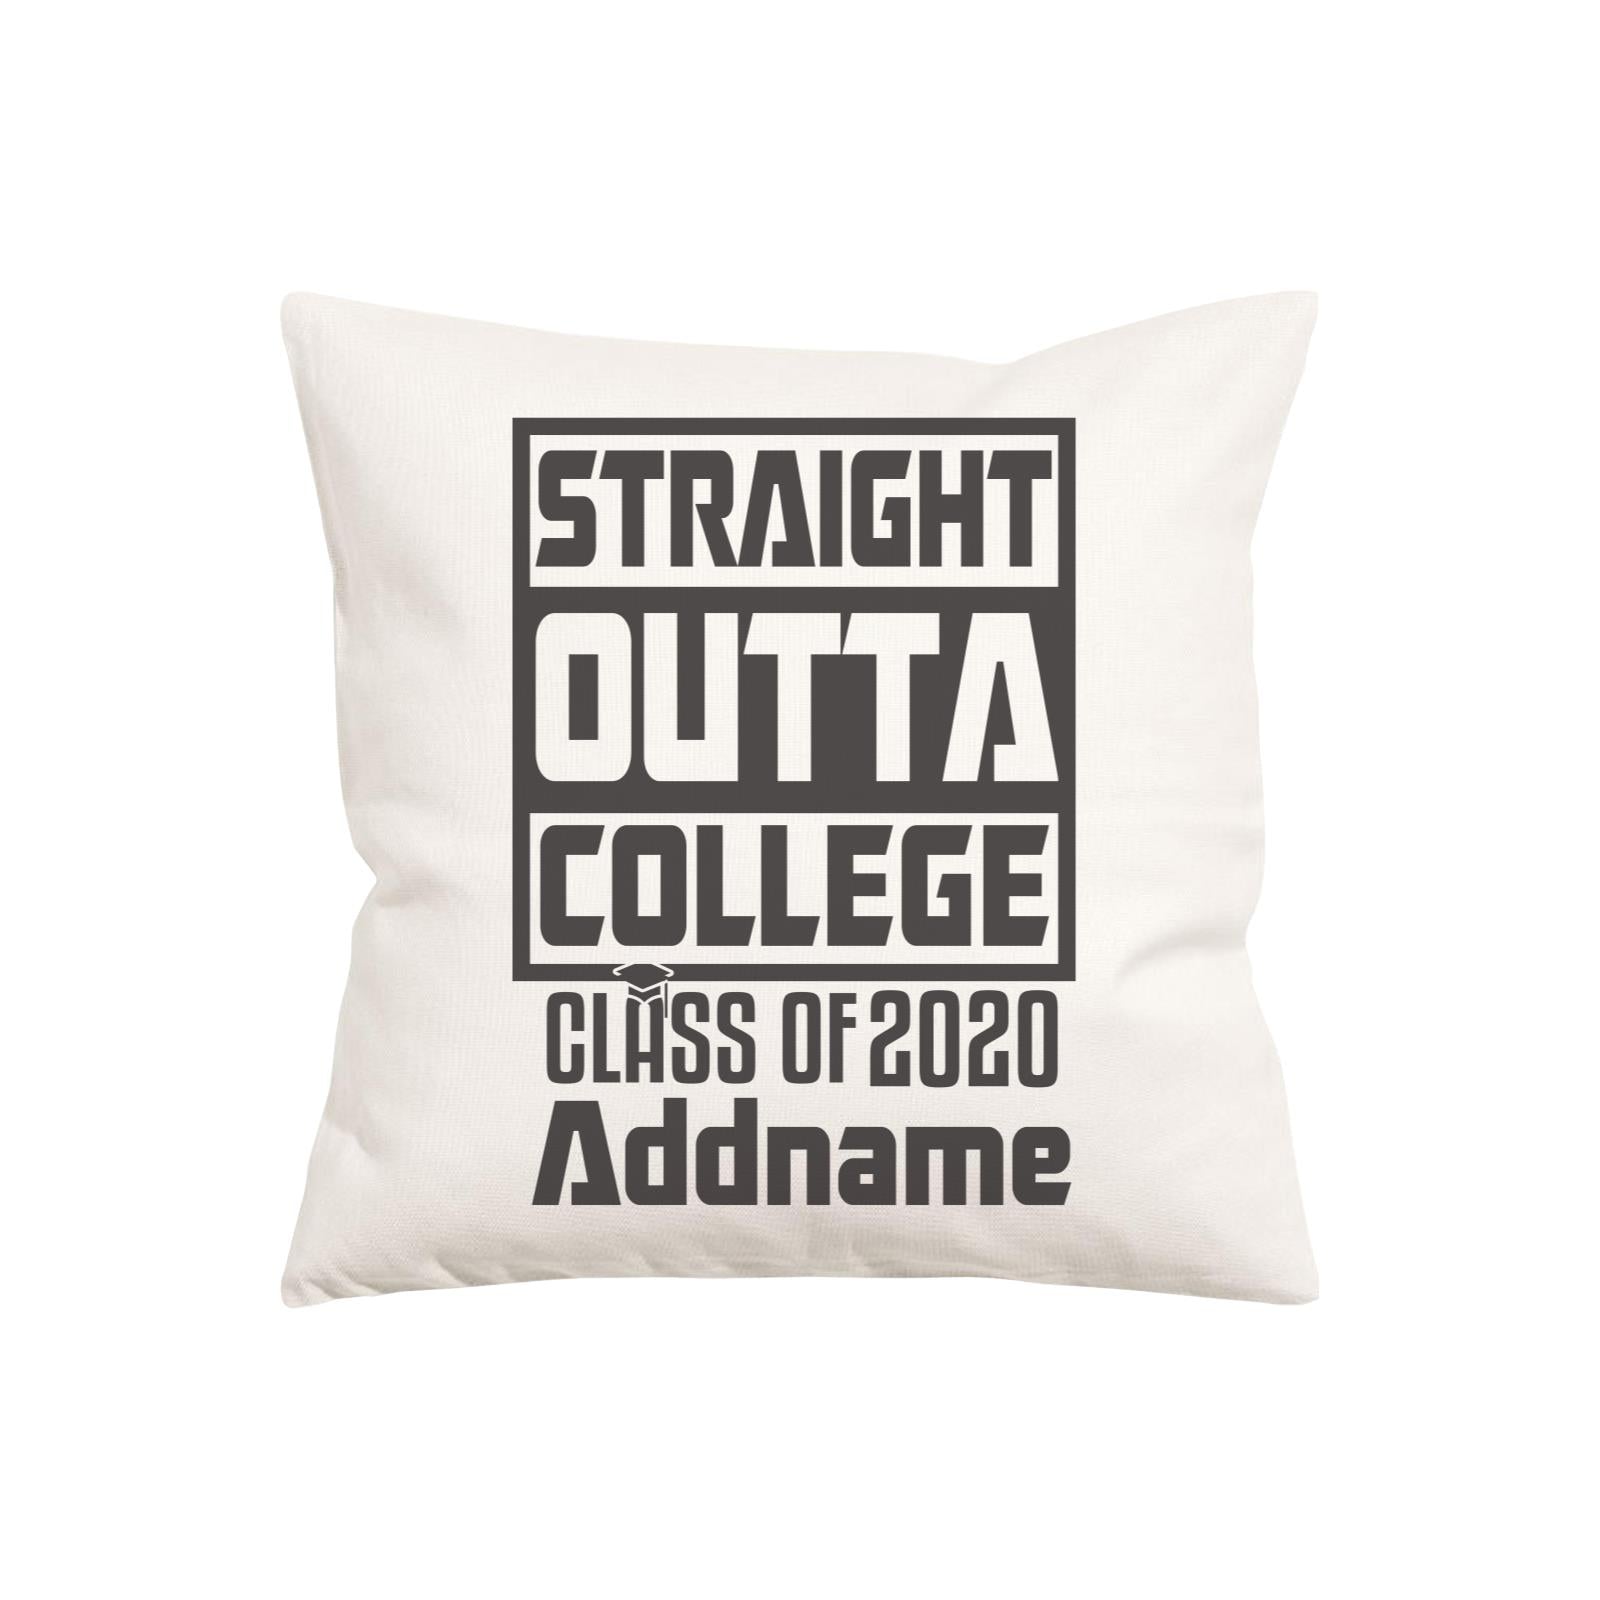 Graduation Series Straight Outta College Pillow Cushion Cover with Inner Cushion